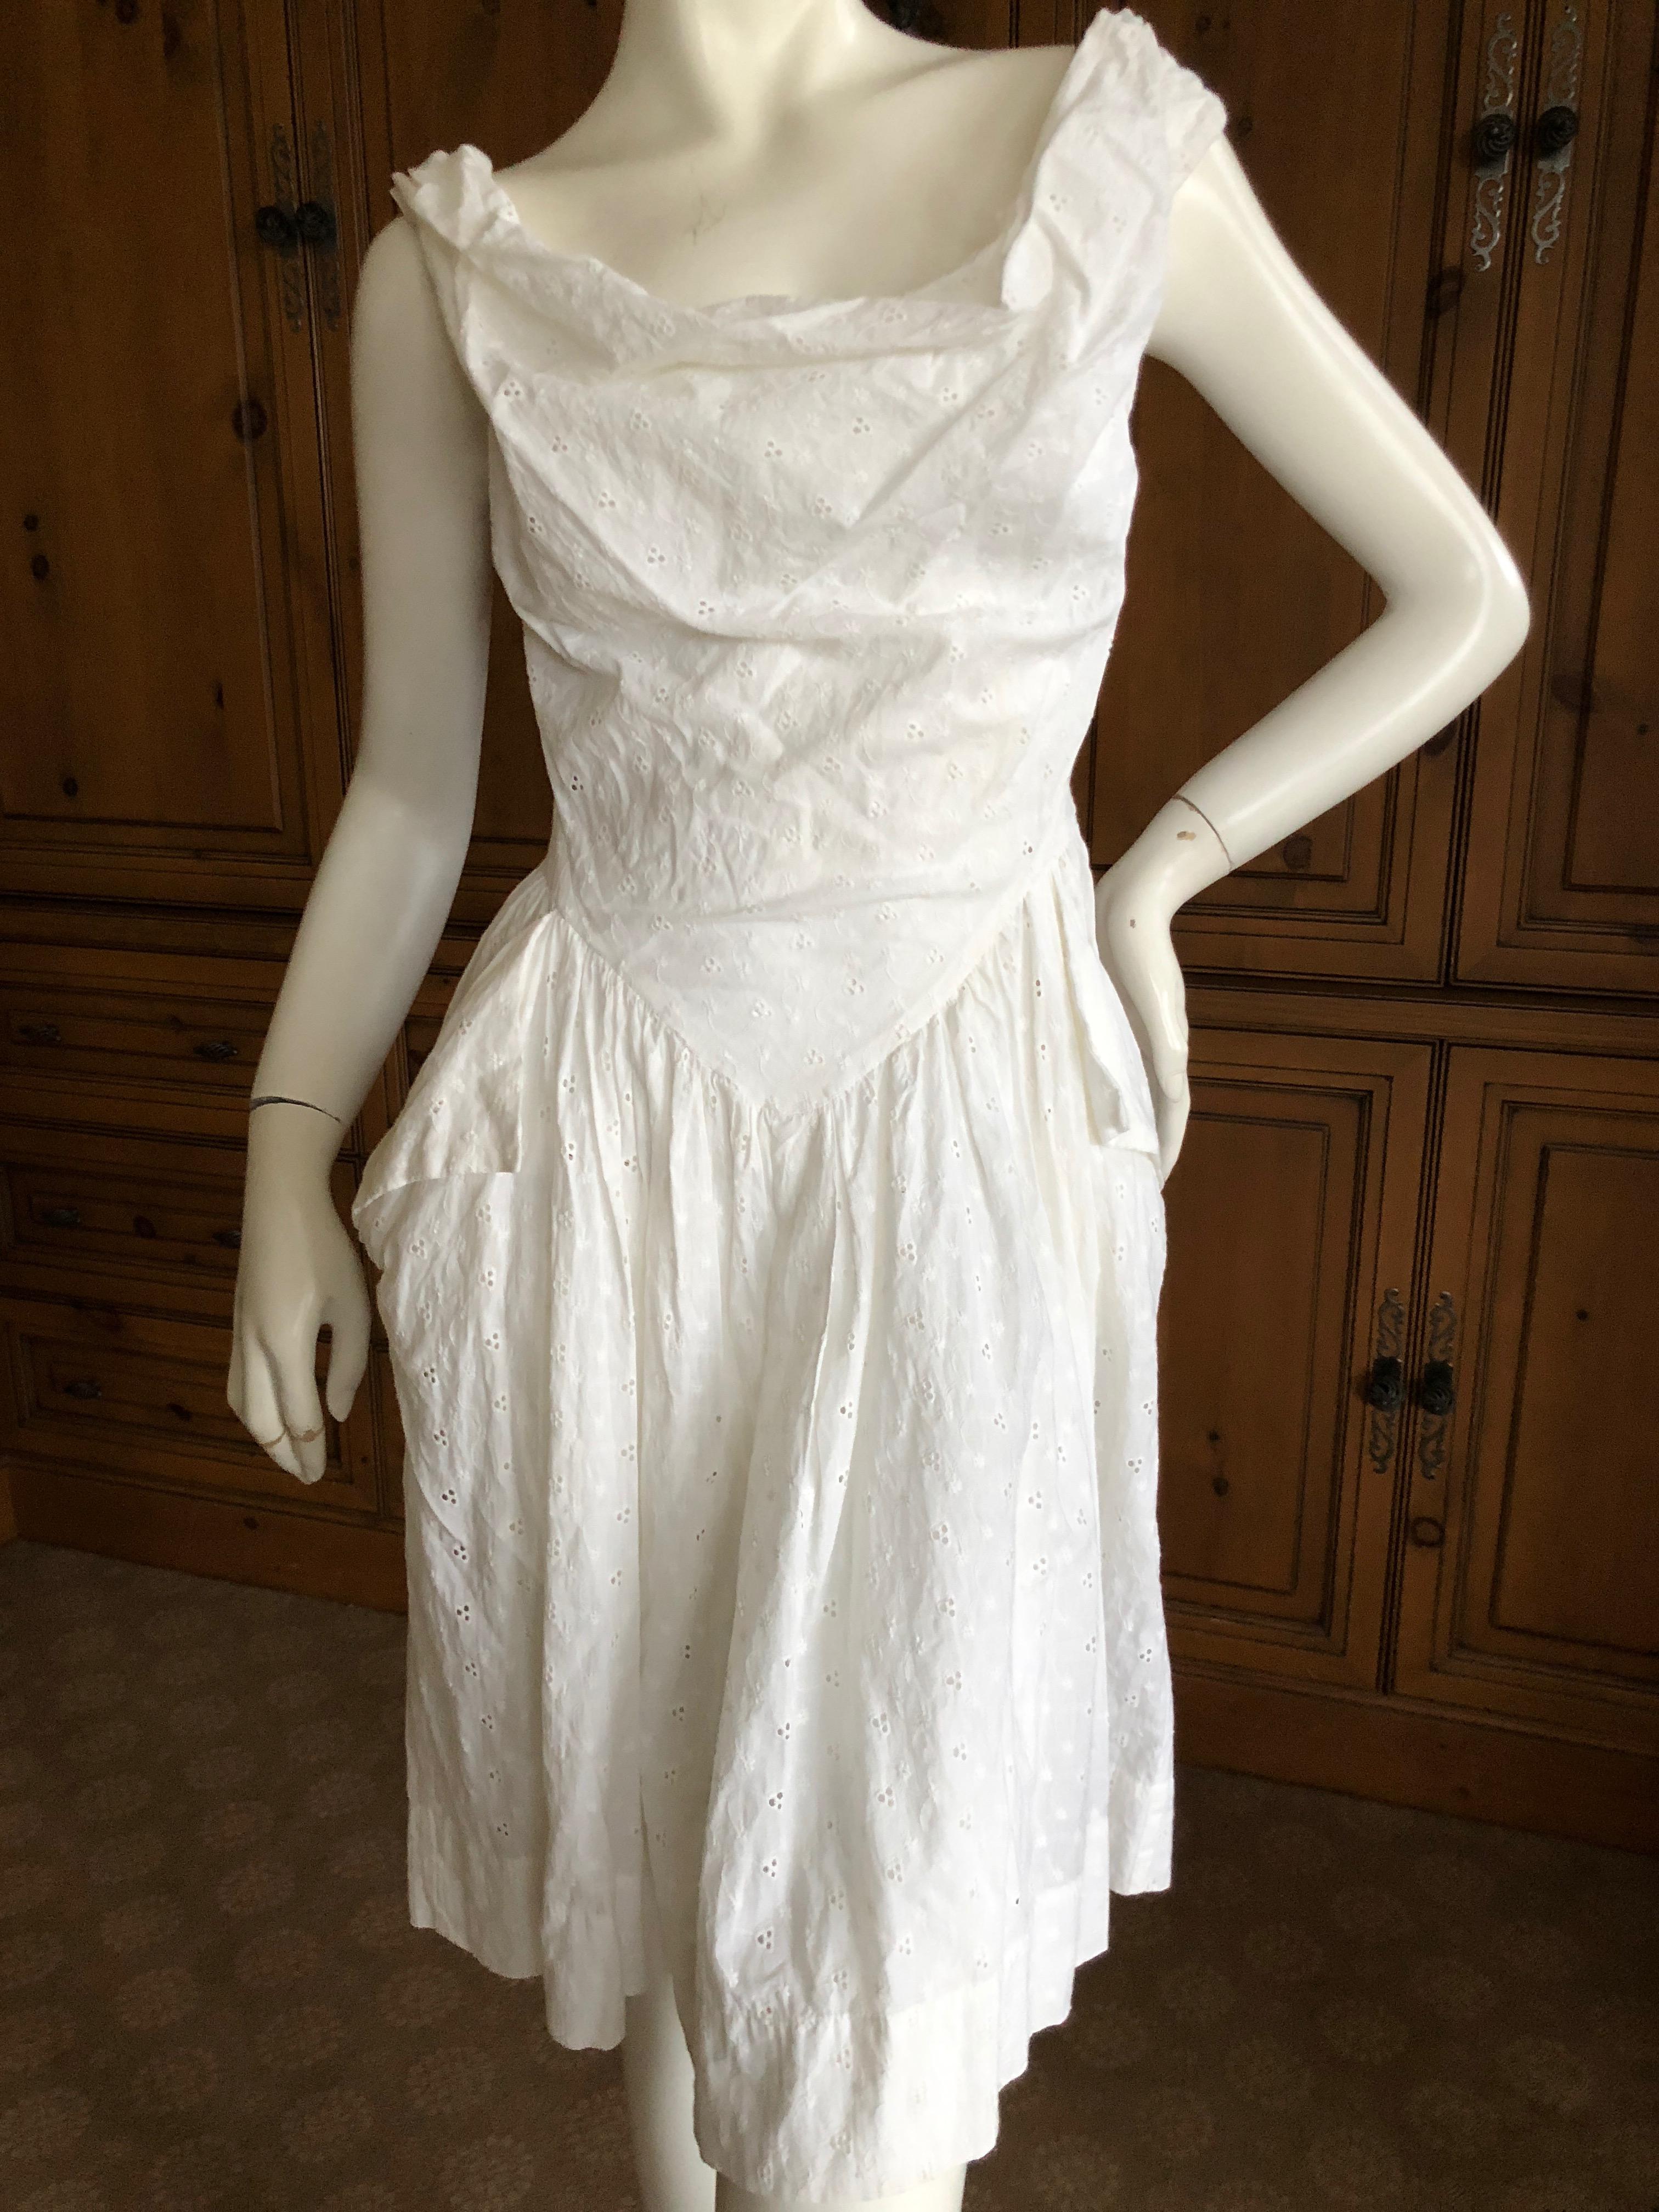 Vivienne Westwood Anglomania White Cotton Eyelet Dress
So sweet, photos don't quite capture it's charm.
 Size 38
 Bust 36